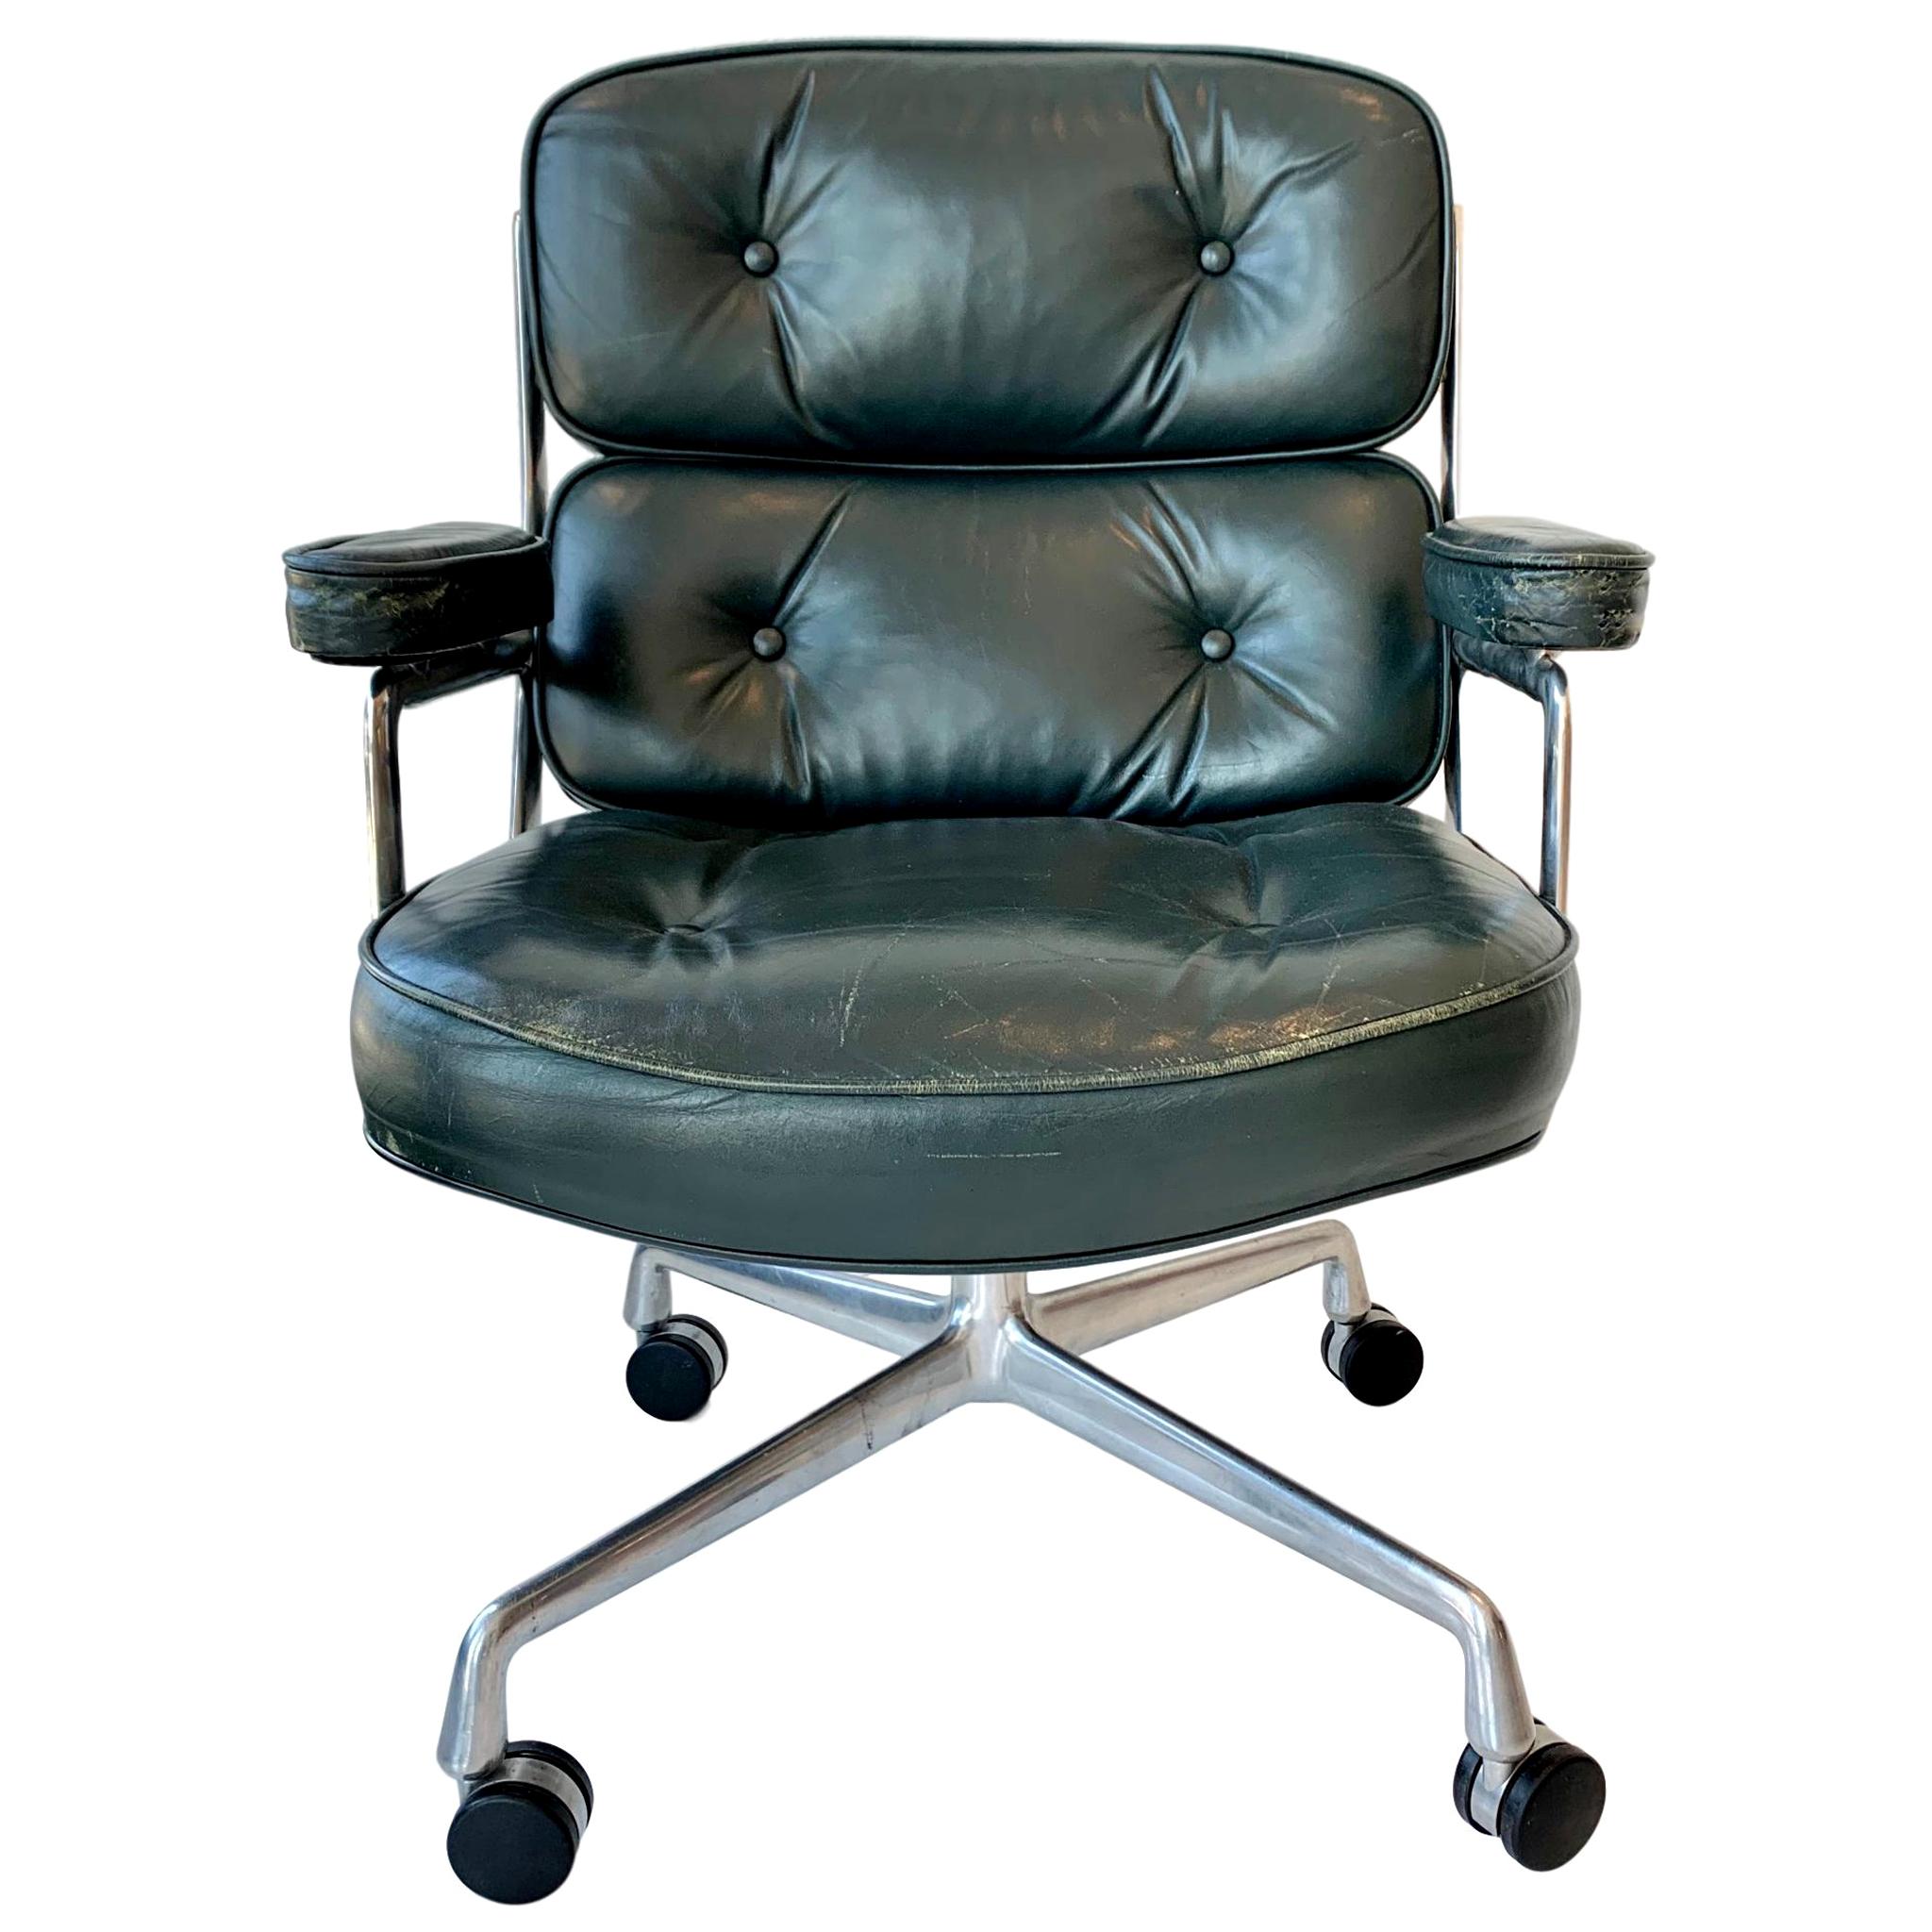 Original Eames Time Life Chairs in Forest Green Leather